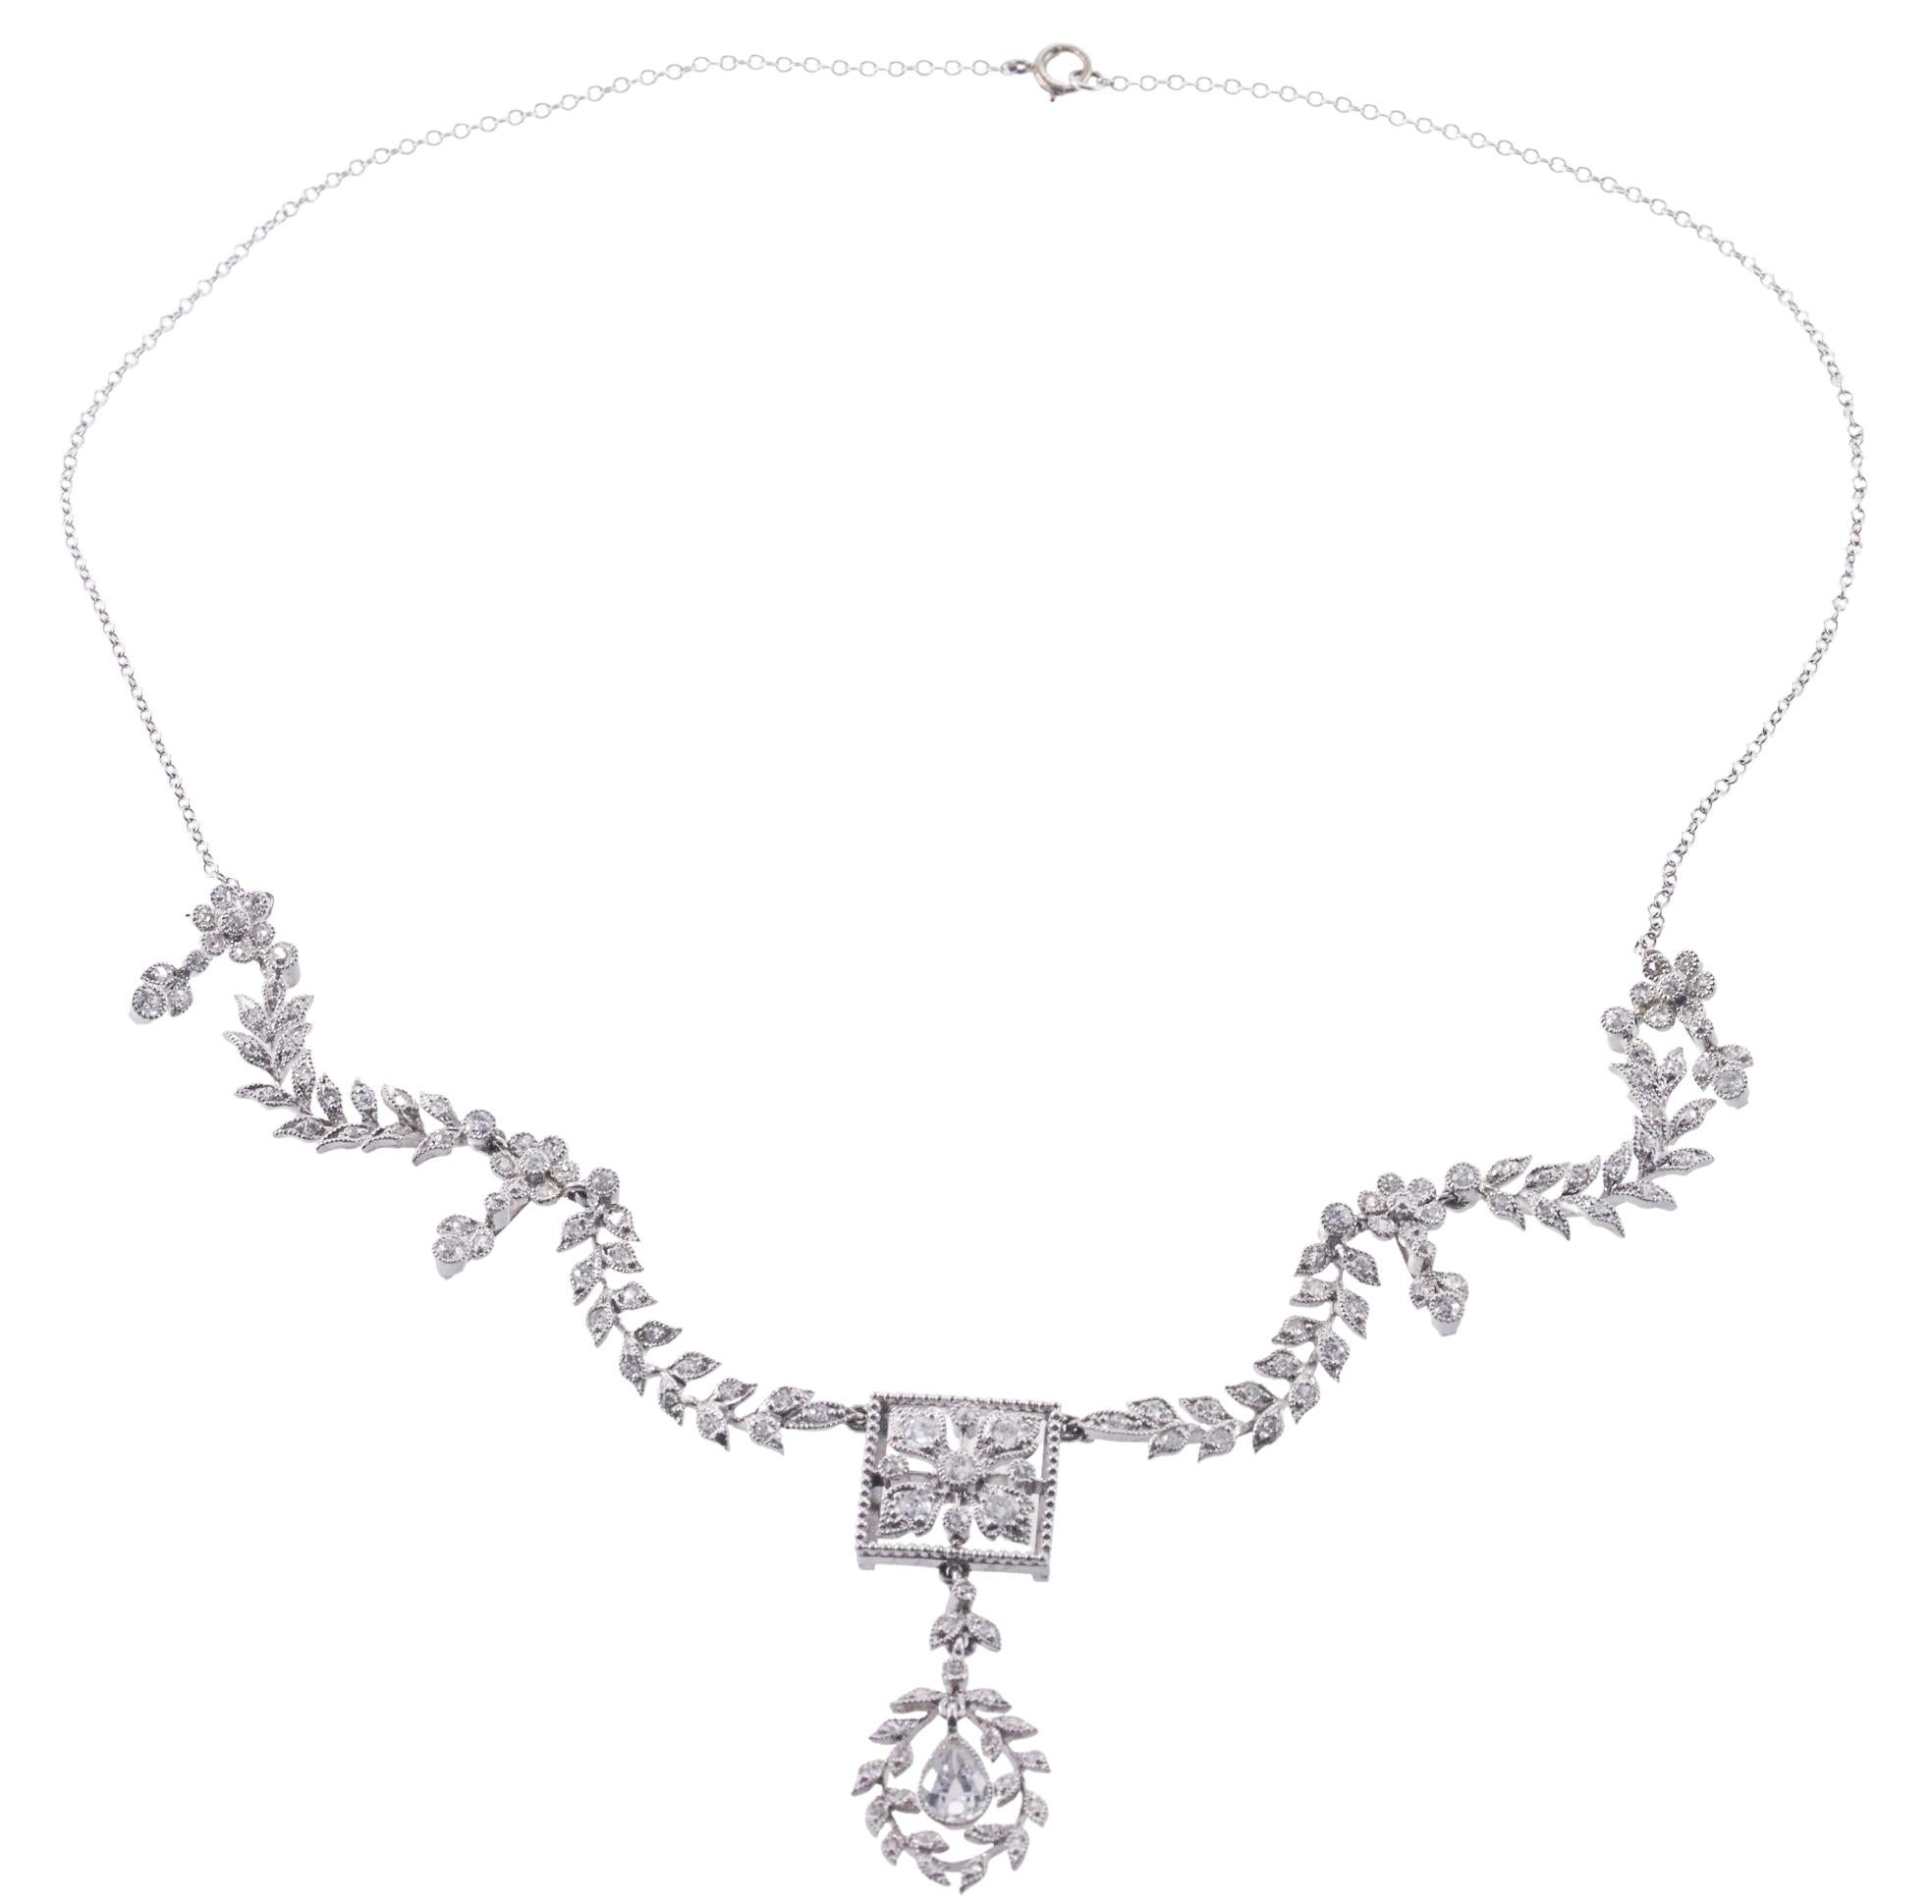 Antique Edwardian Delicate Diamond Platinum Gold Necklace In Excellent Condition For Sale In New York, NY